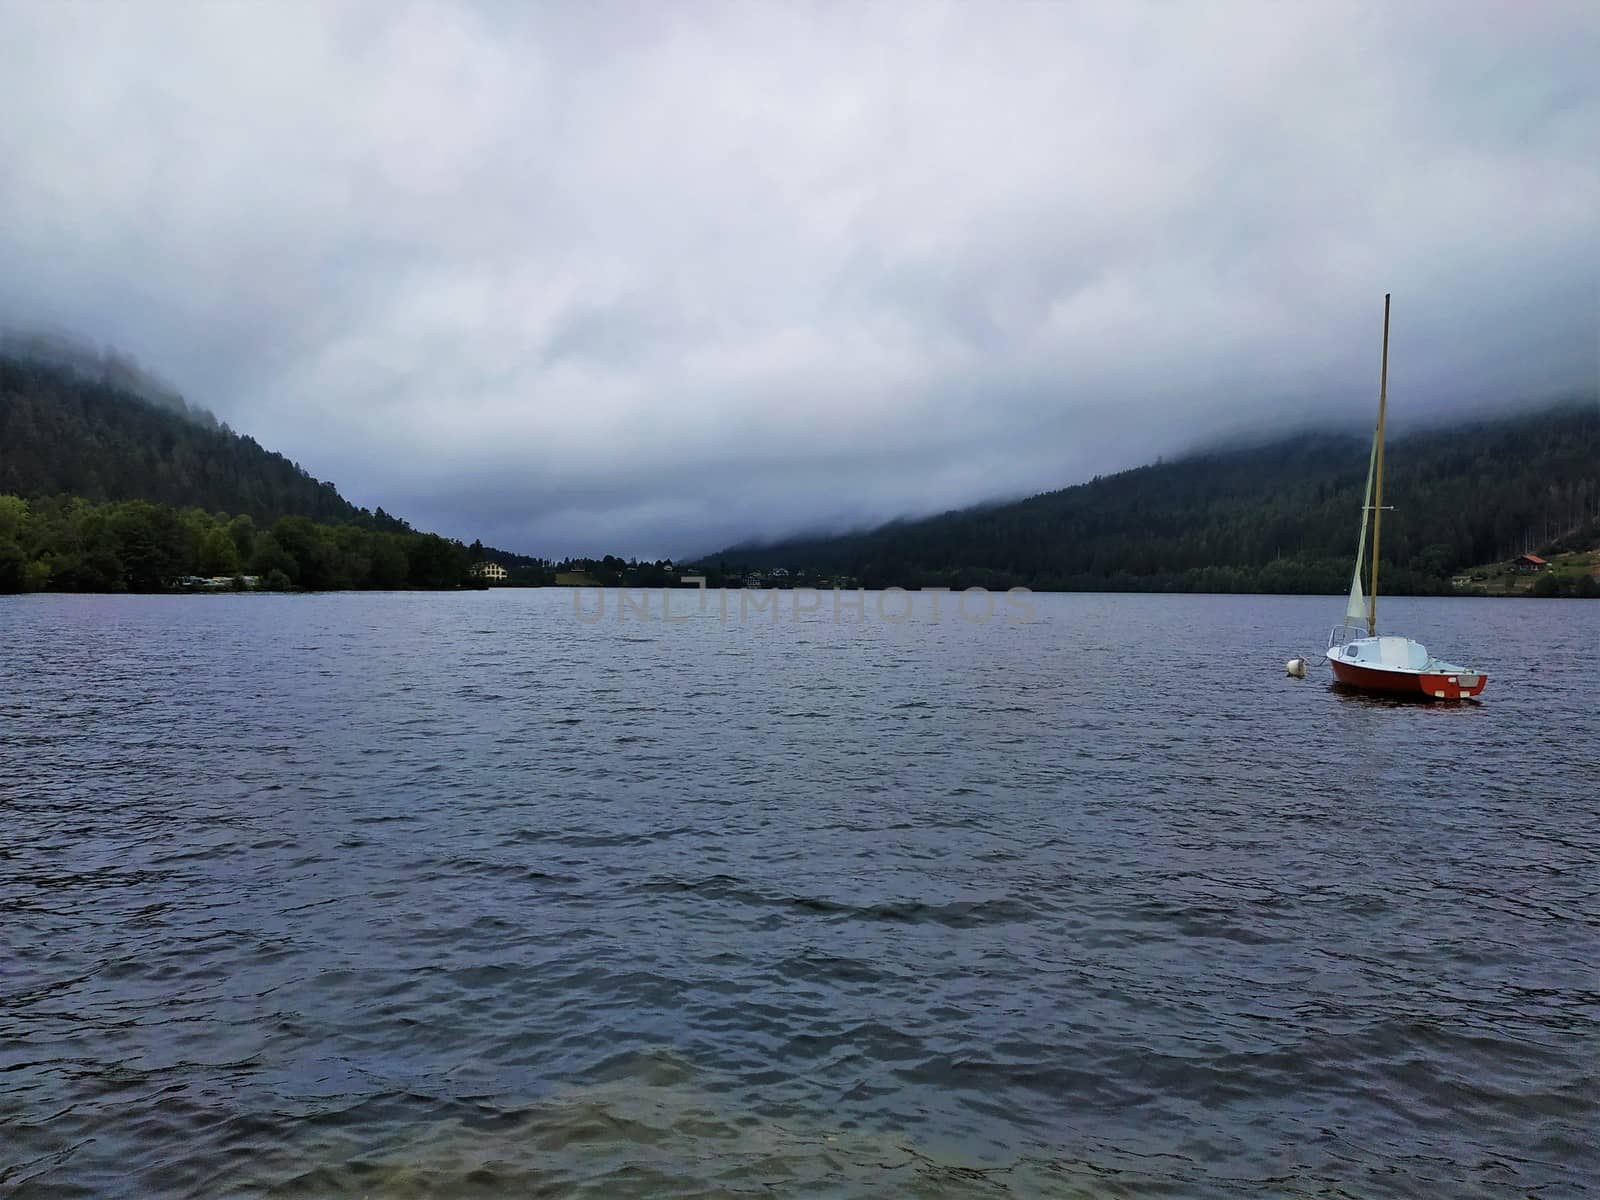 Dramatic scene of a boat on the lake in Gerardmer on a cloudy and stormy day by pisces2386